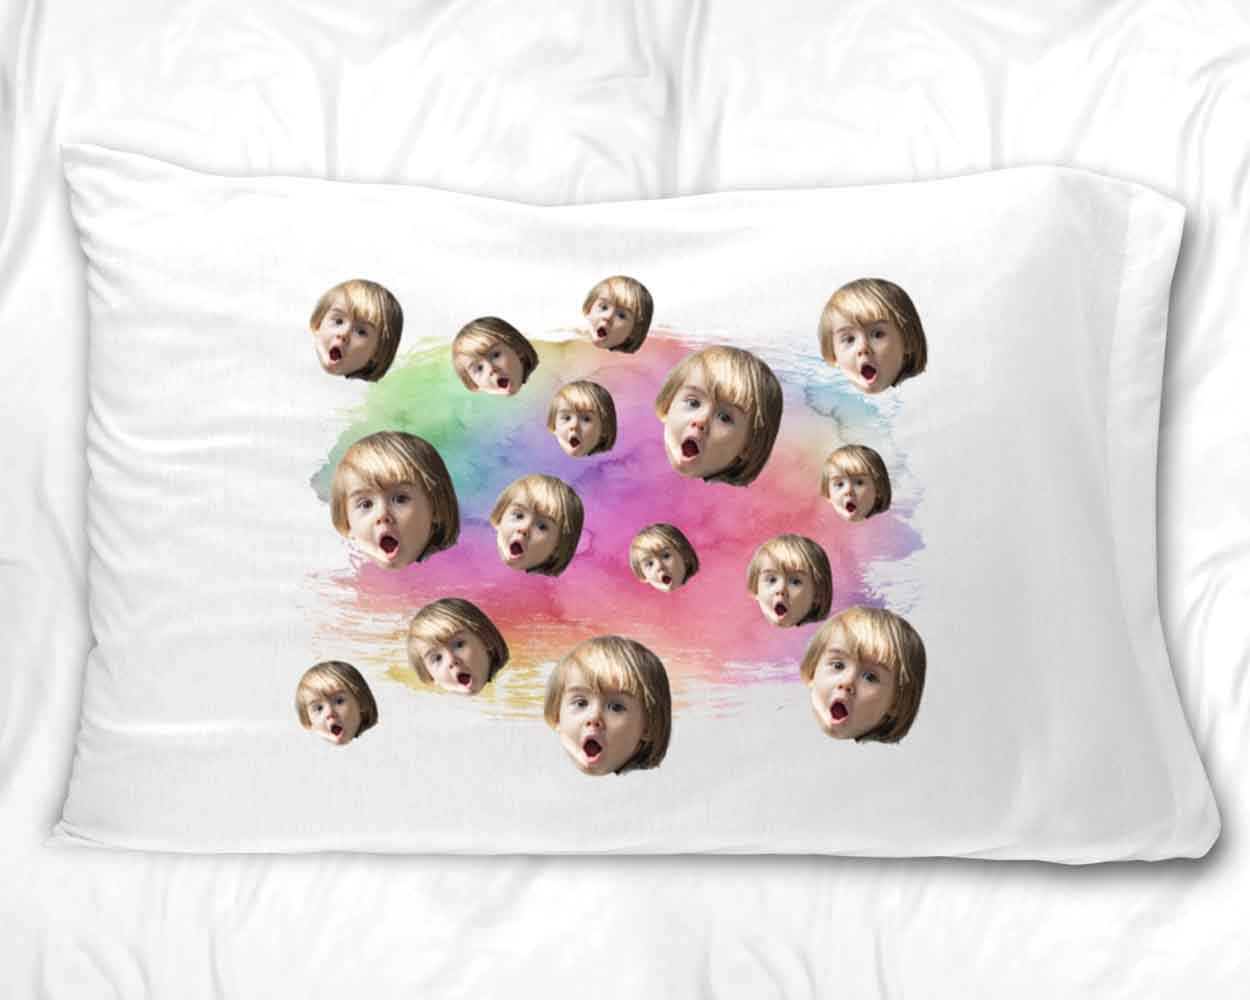 Rainbow print background design with photo faces in collage all over printed on pillowcase.